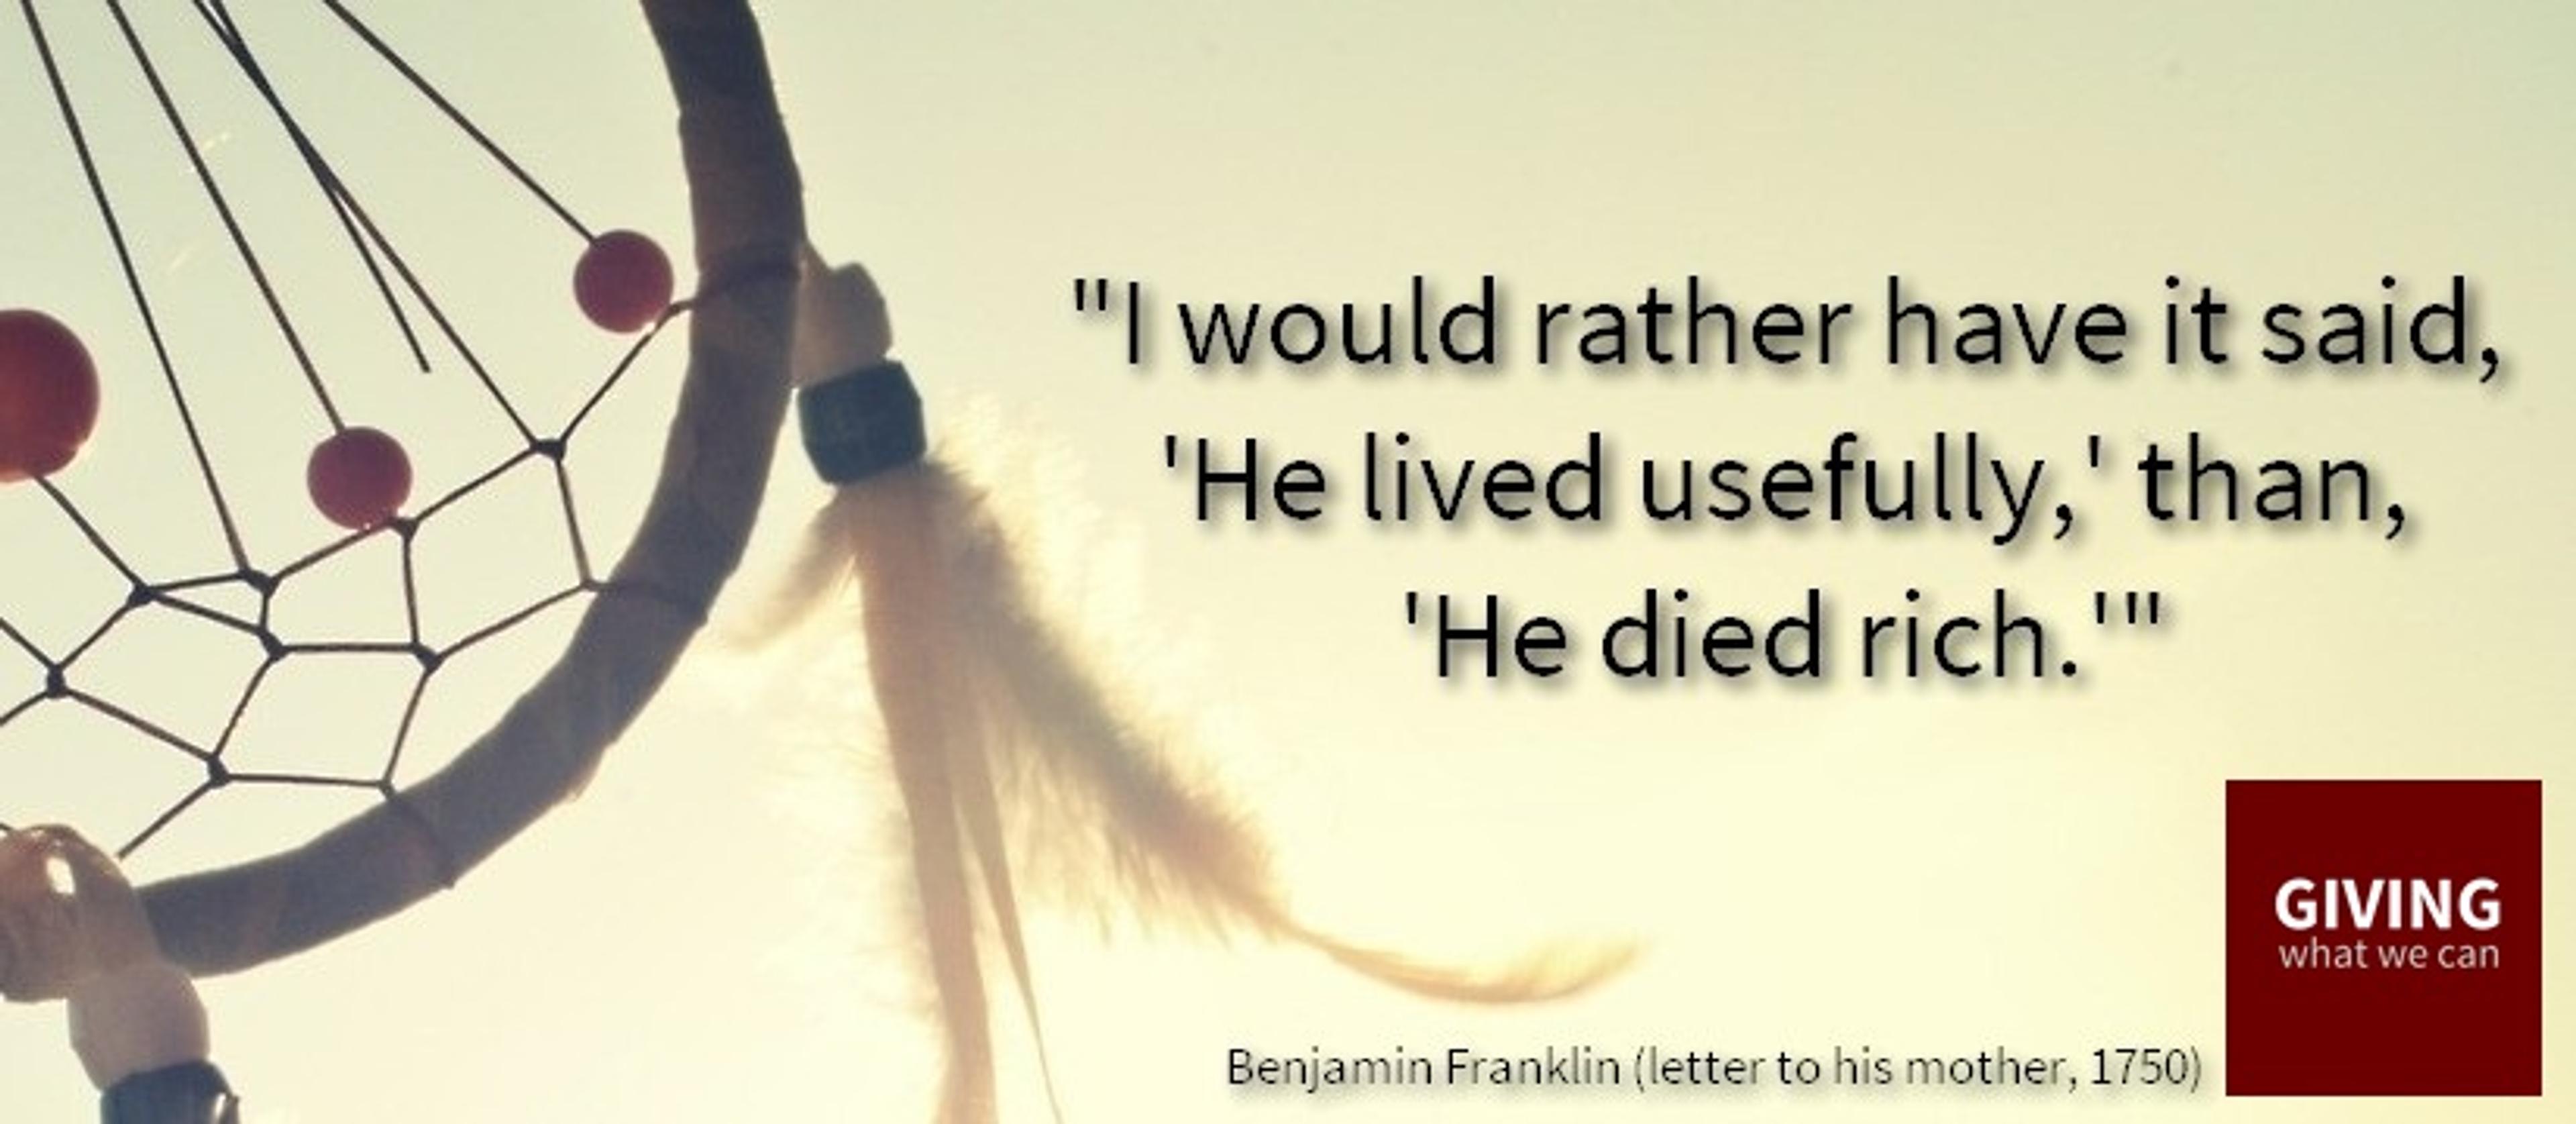 I would rather have it said, 'He lived usefully,' than, 'He died rich.'